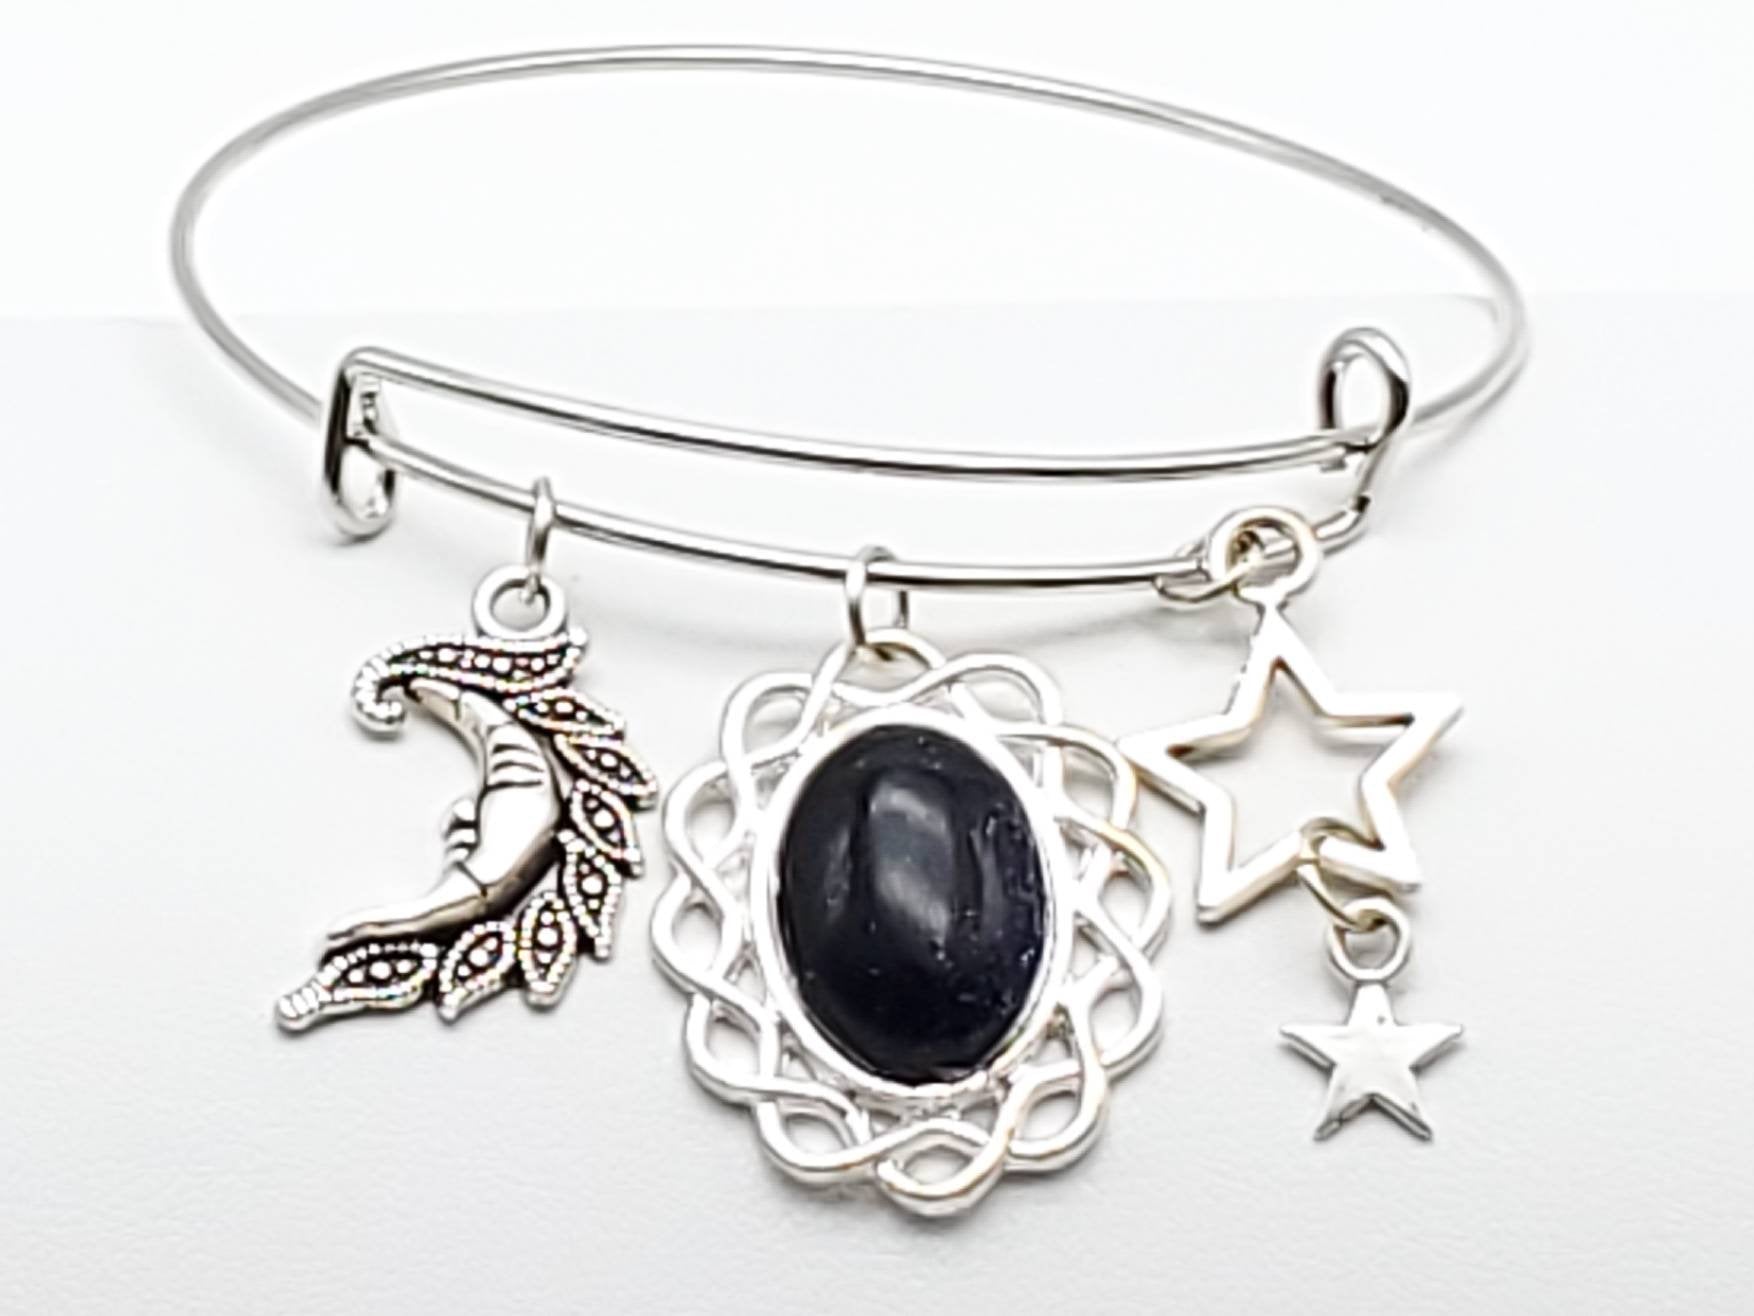 Blue Sandstone Charm Bangle with Moon & Star Charms - The Caffeinated Raven